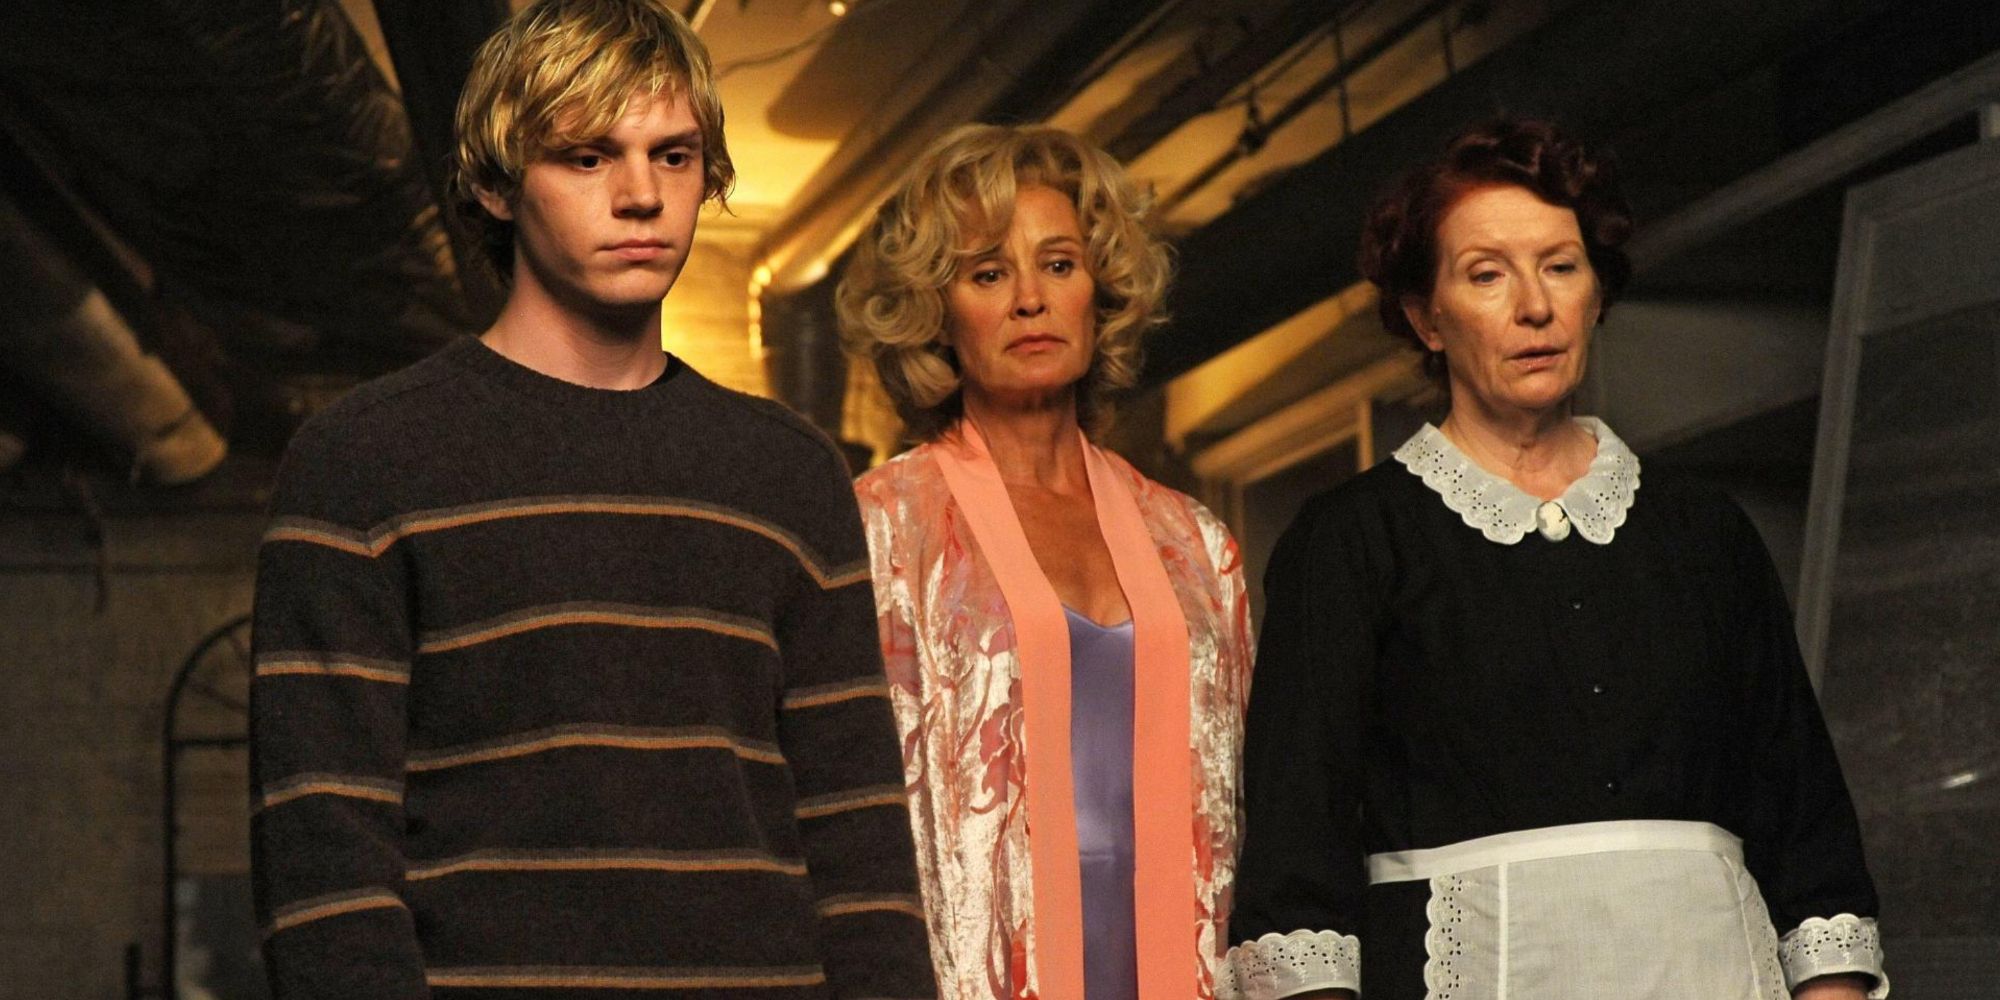 Evan Peters, Jessica Lange and Frances Conroy looking down at something 